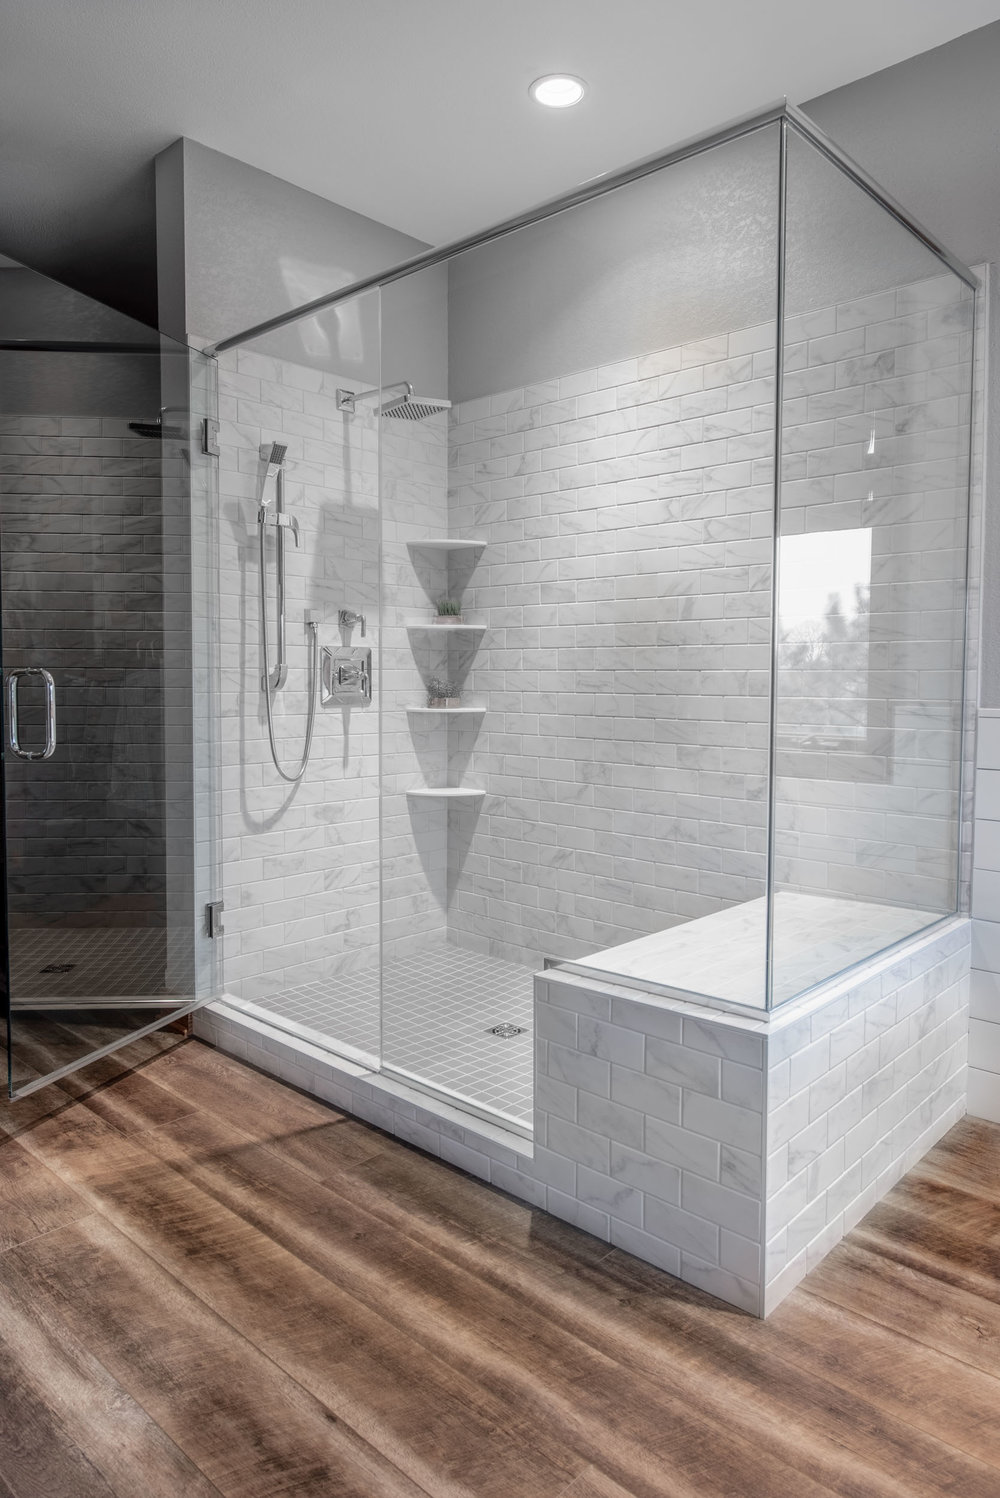 How To Choose Shower Tile When, How To Remodel A Bathroom Shower With Tile